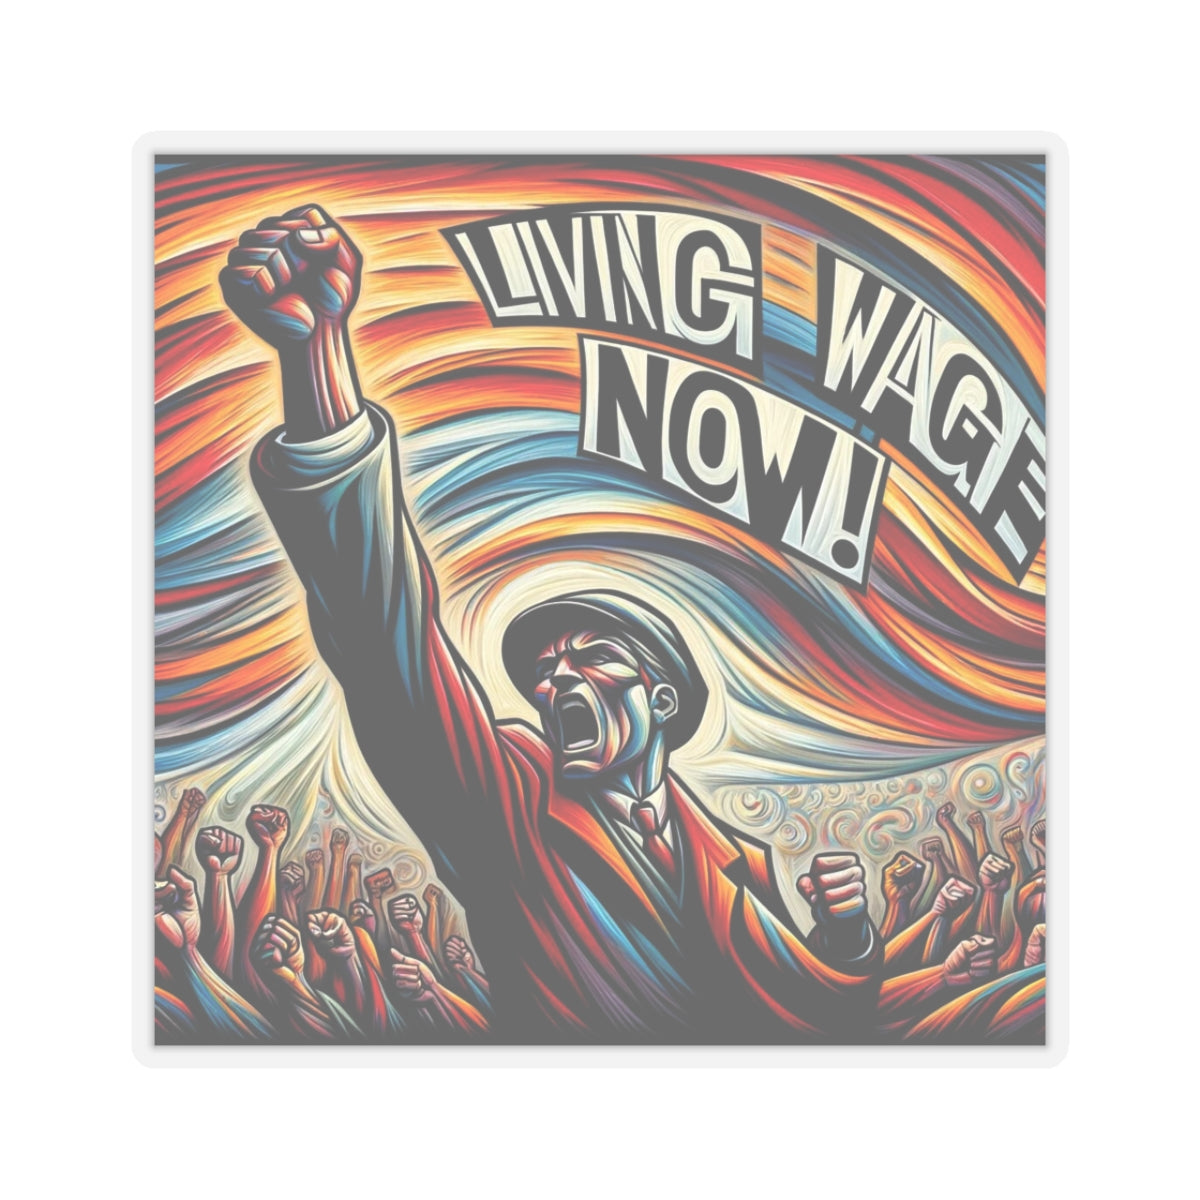 Bold and Uncompromising Statement Sticker: Living Wage Now!